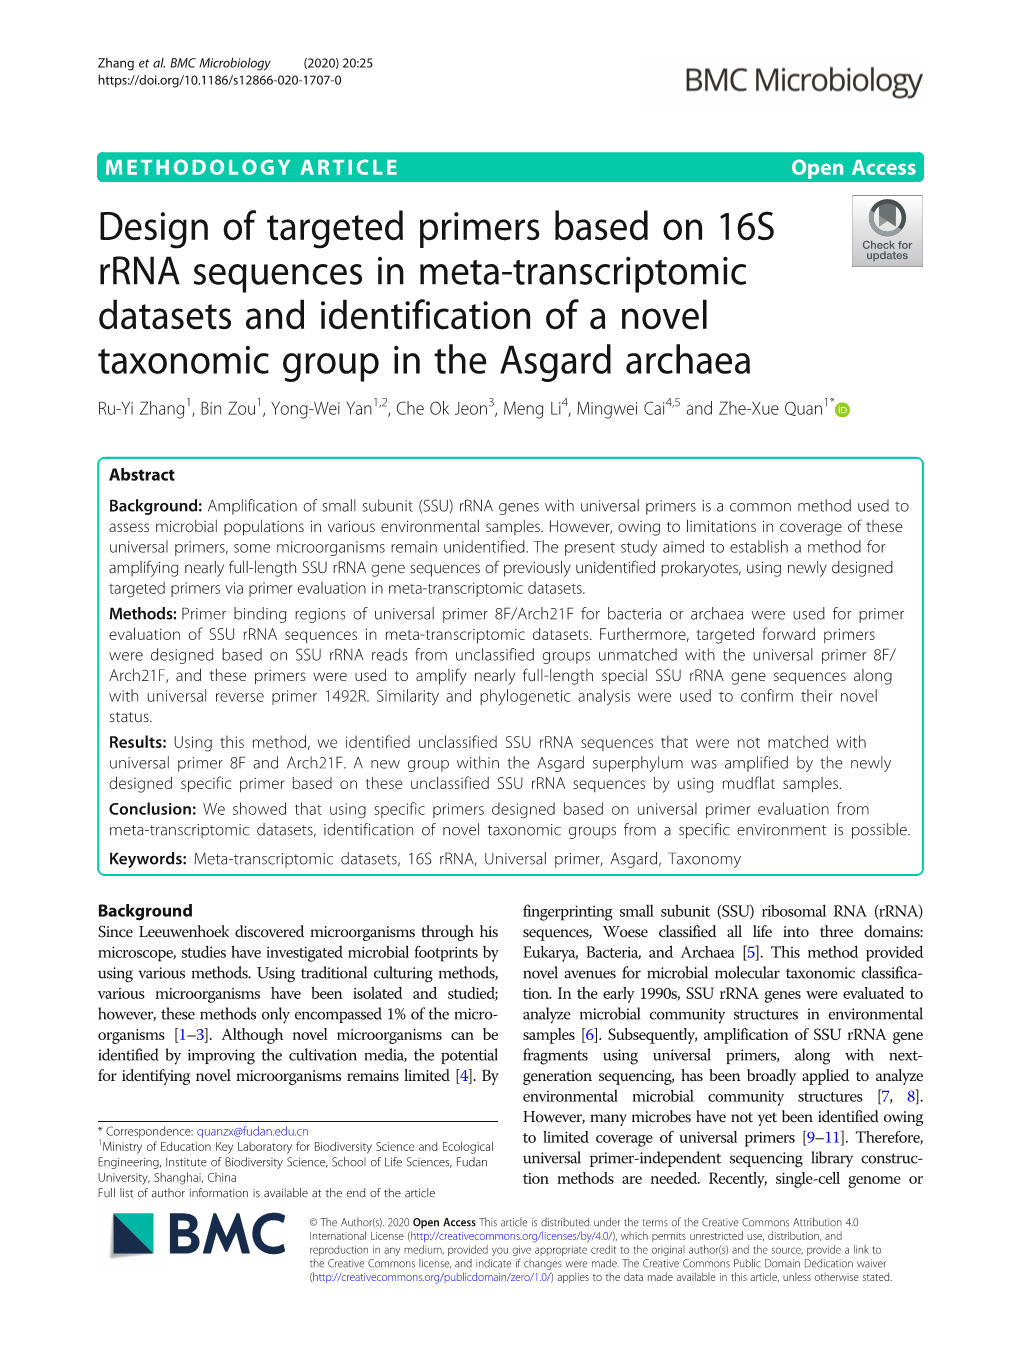 Design of Targeted Primers Based on 16S Rrna Sequences in Meta